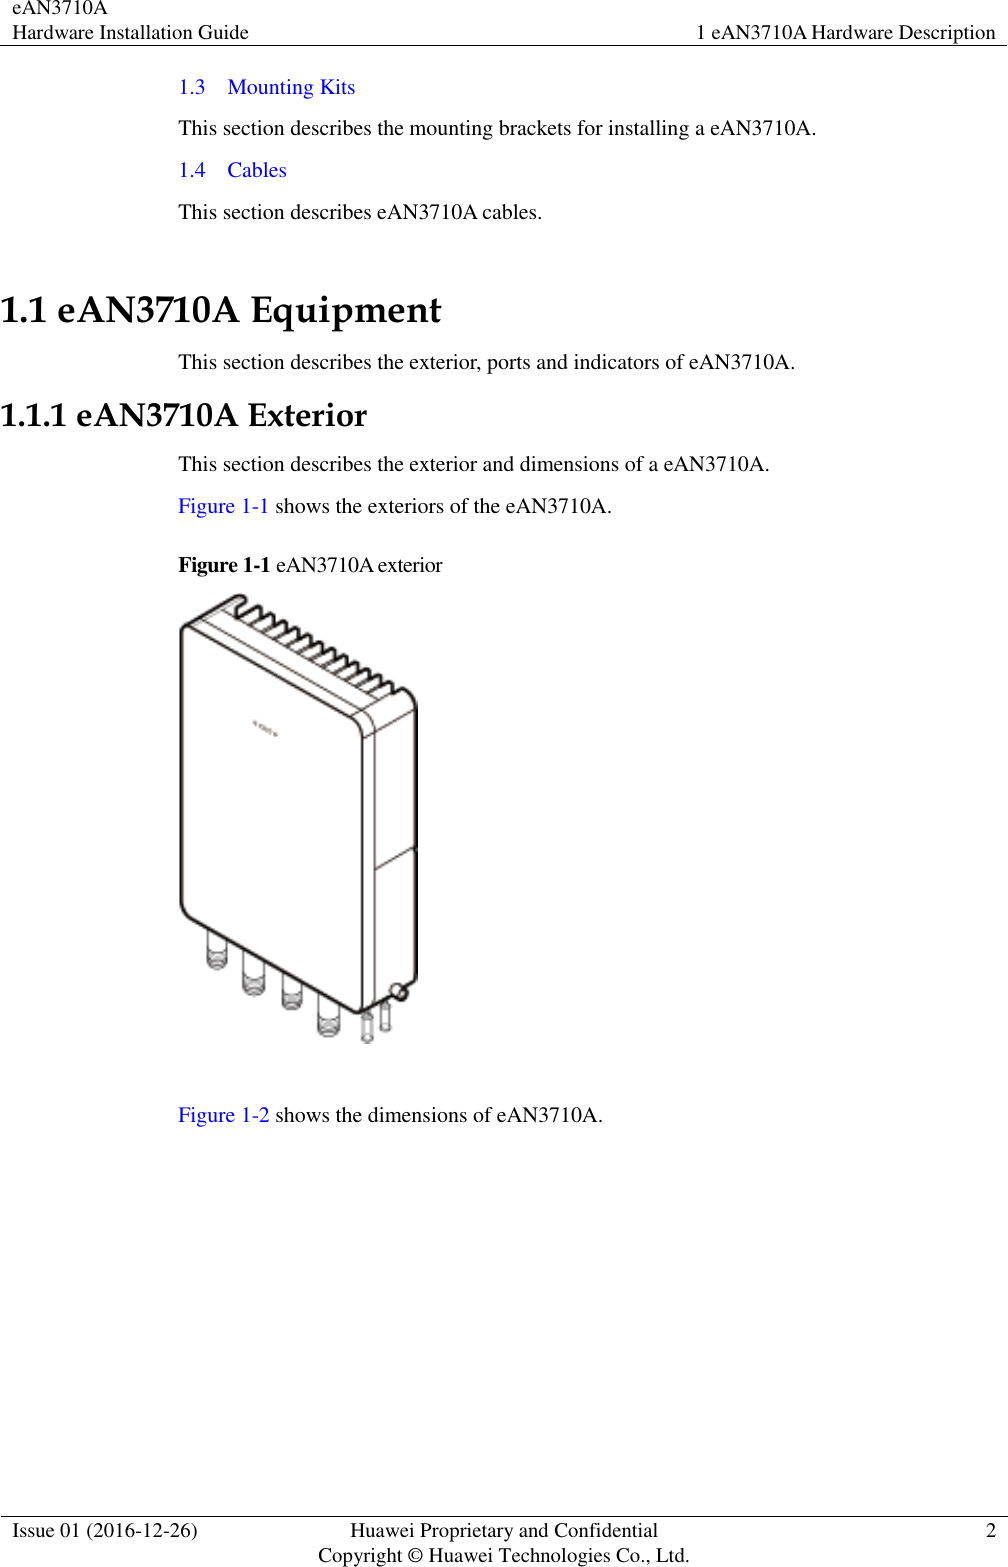 eAN3710A Hardware Installation Guide 1 eAN3710A Hardware Description  Issue 01 (2016-12-26) Huawei Proprietary and Confidential                                     Copyright © Huawei Technologies Co., Ltd. 2  1.3    Mounting Kits This section describes the mounting brackets for installing a eAN3710A. 1.4    Cables This section describes eAN3710A cables. 1.1 eAN3710A Equipment This section describes the exterior, ports and indicators of eAN3710A. 1.1.1 eAN3710A Exterior This section describes the exterior and dimensions of a eAN3710A. Figure 1-1 shows the exteriors of the eAN3710A. Figure 1-1 eAN3710A exterior   Figure 1-2 shows the dimensions of eAN3710A. 